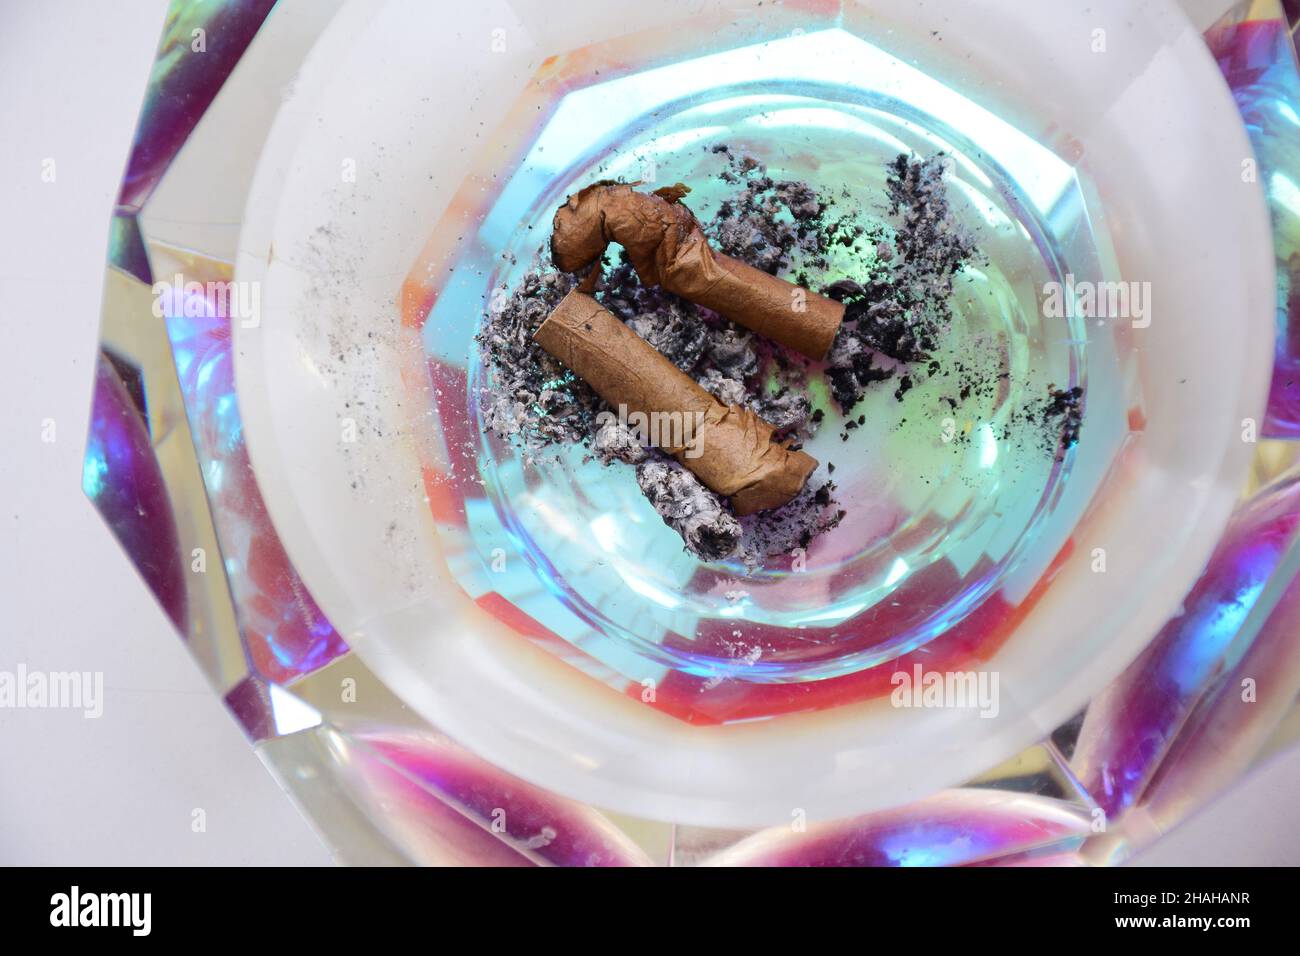 Two smoked small cigars lie on the ashes in a faceted crystal ashtray close-up Stock Photo